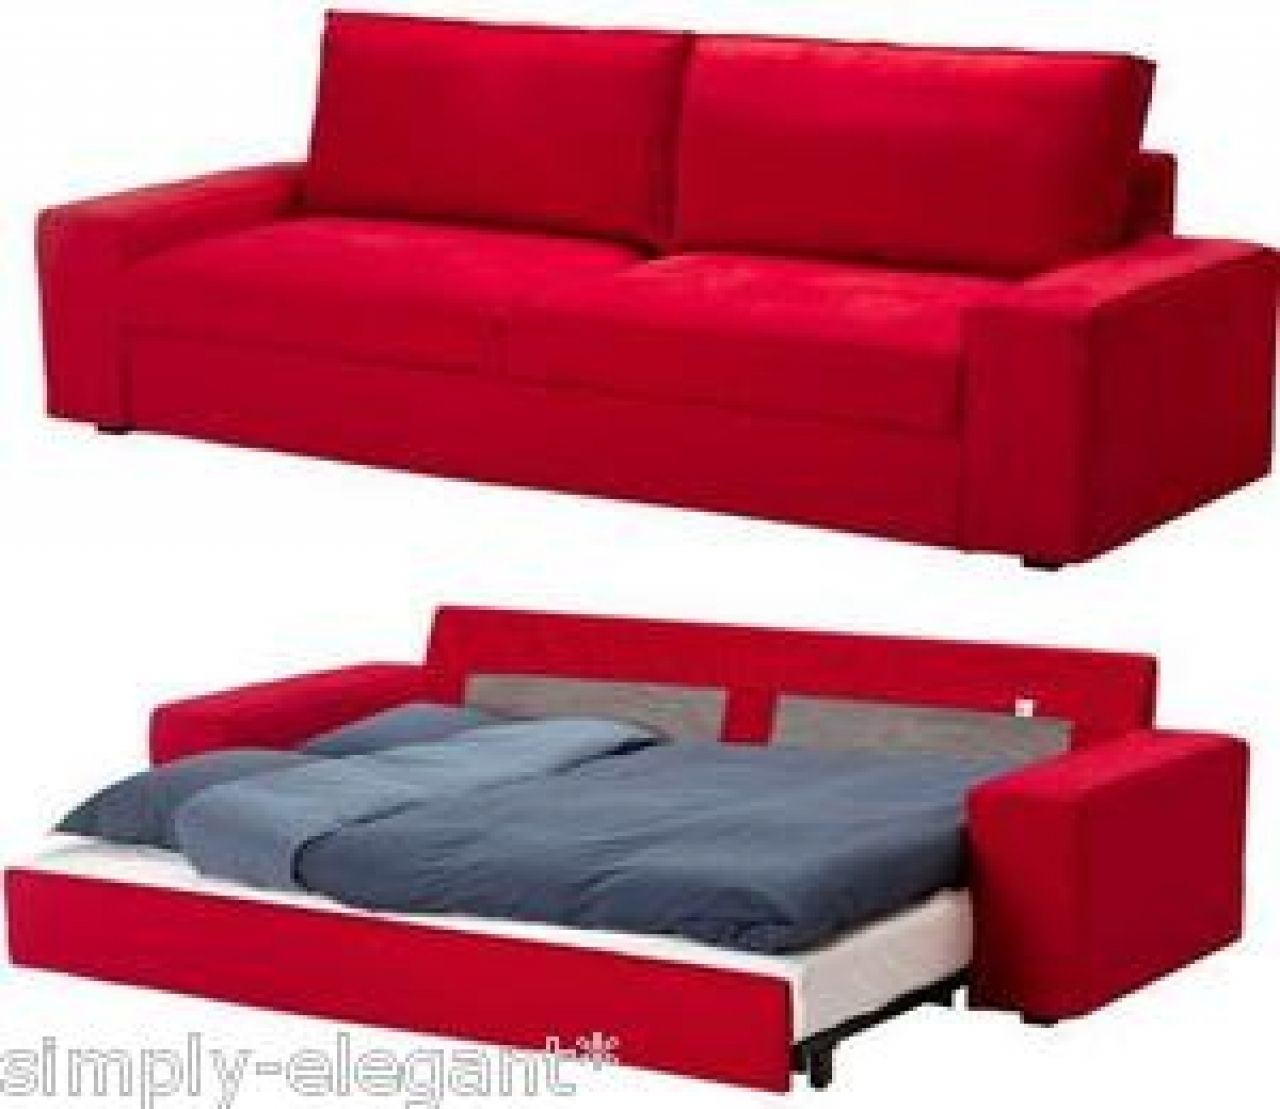 Red Sleeper Sofa Medium Office Chairs Bedroom Furniture Bed Frames Intended For Red Sleeper Sofas (View 4 of 12)